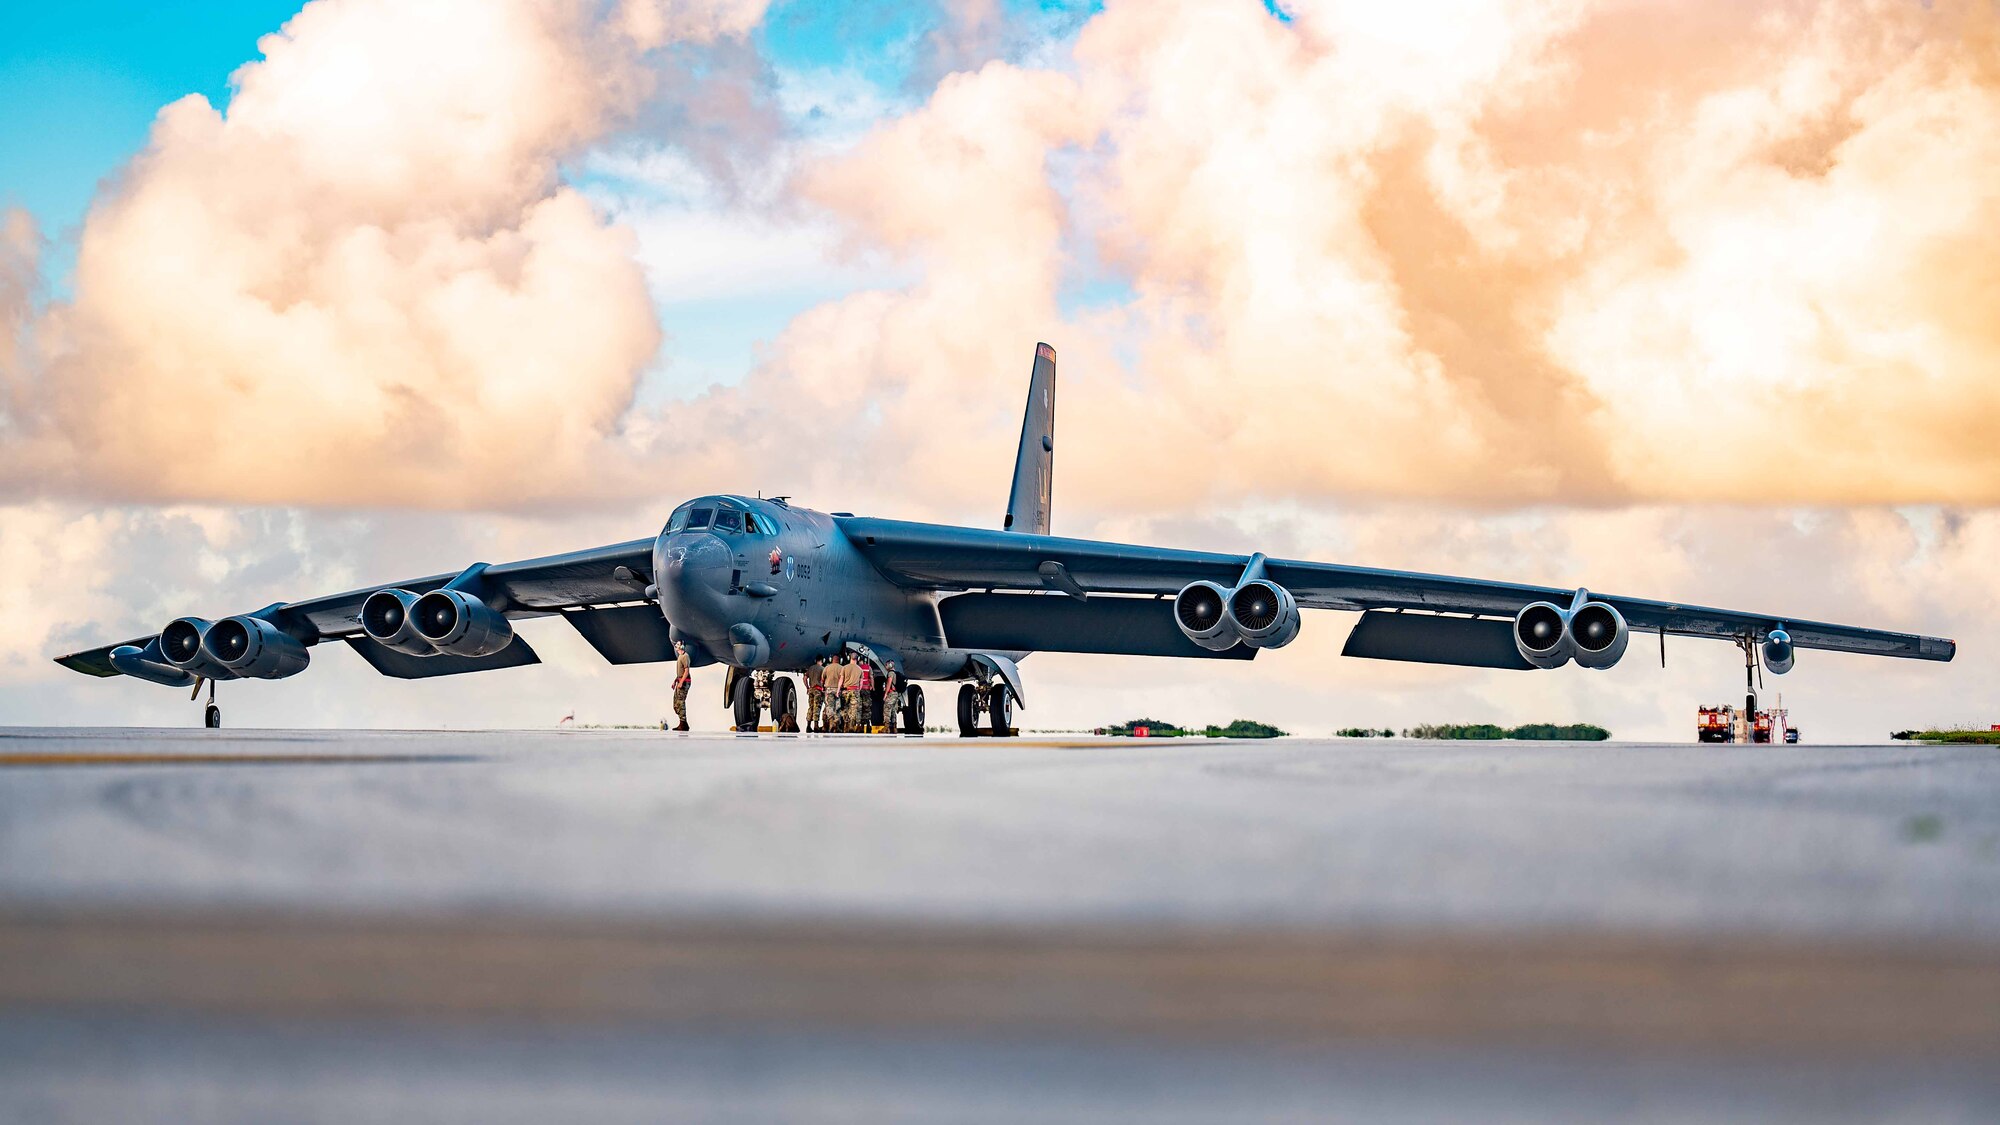 A B-52 Stratofortress assigned to the 2nd Bomb Wing at Barksdale Air Force Base, Louisiana receives maintenance at Andersen Air Force Base, Guam in support of a Bomber Task Force mission, April 11, 2023.